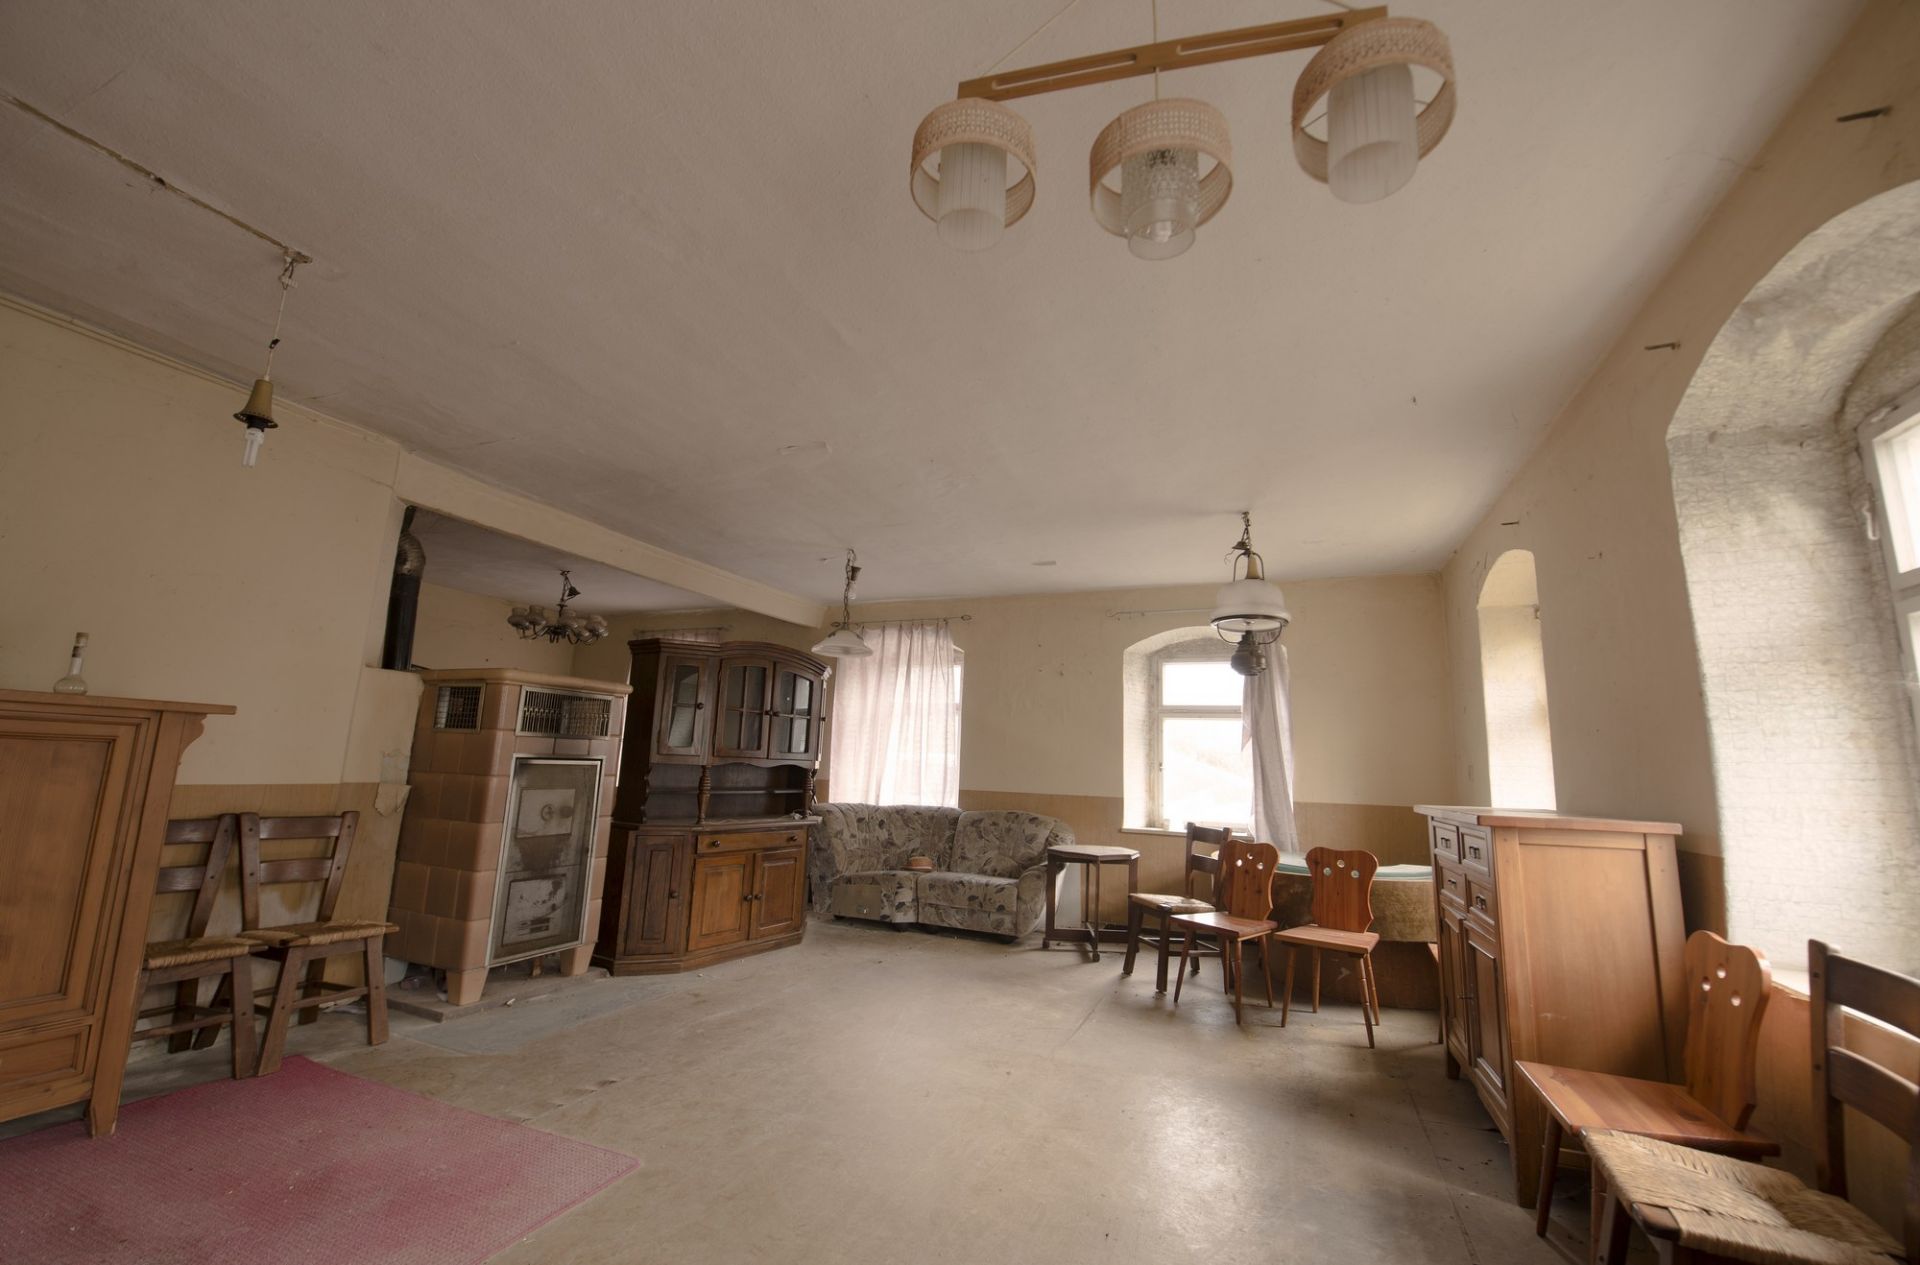 LARGE FORMER GUEST HOUSE IN NOSSEN, GERMANY - Image 9 of 47